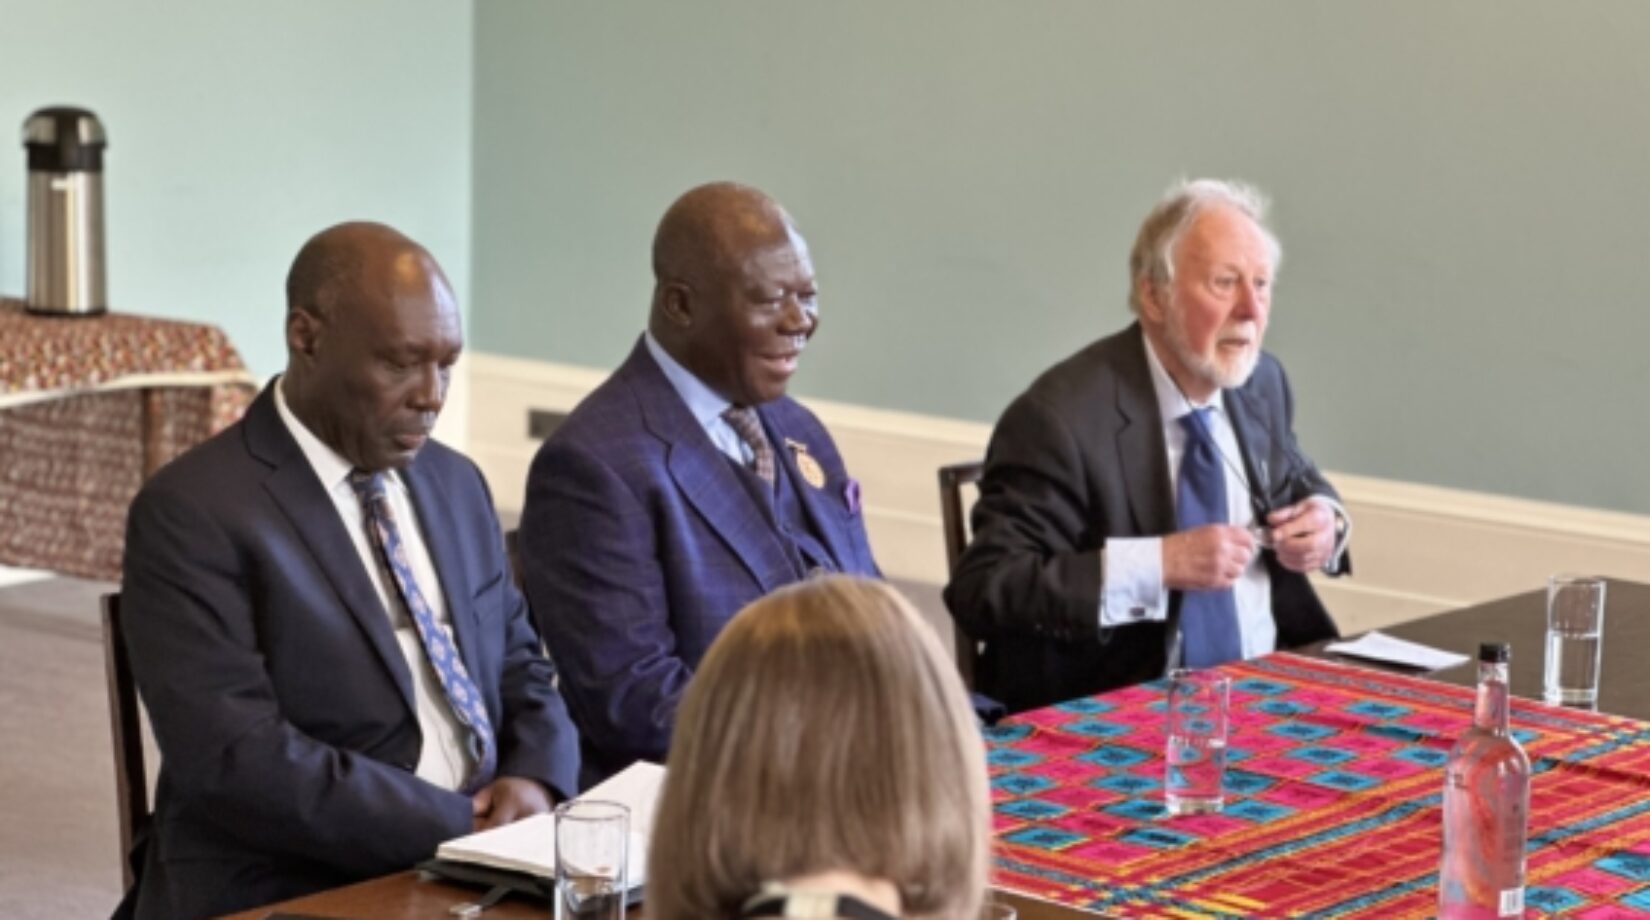 Otumfuo reaches agreement with King Charles III to reclaim Ghana’s degraded lands